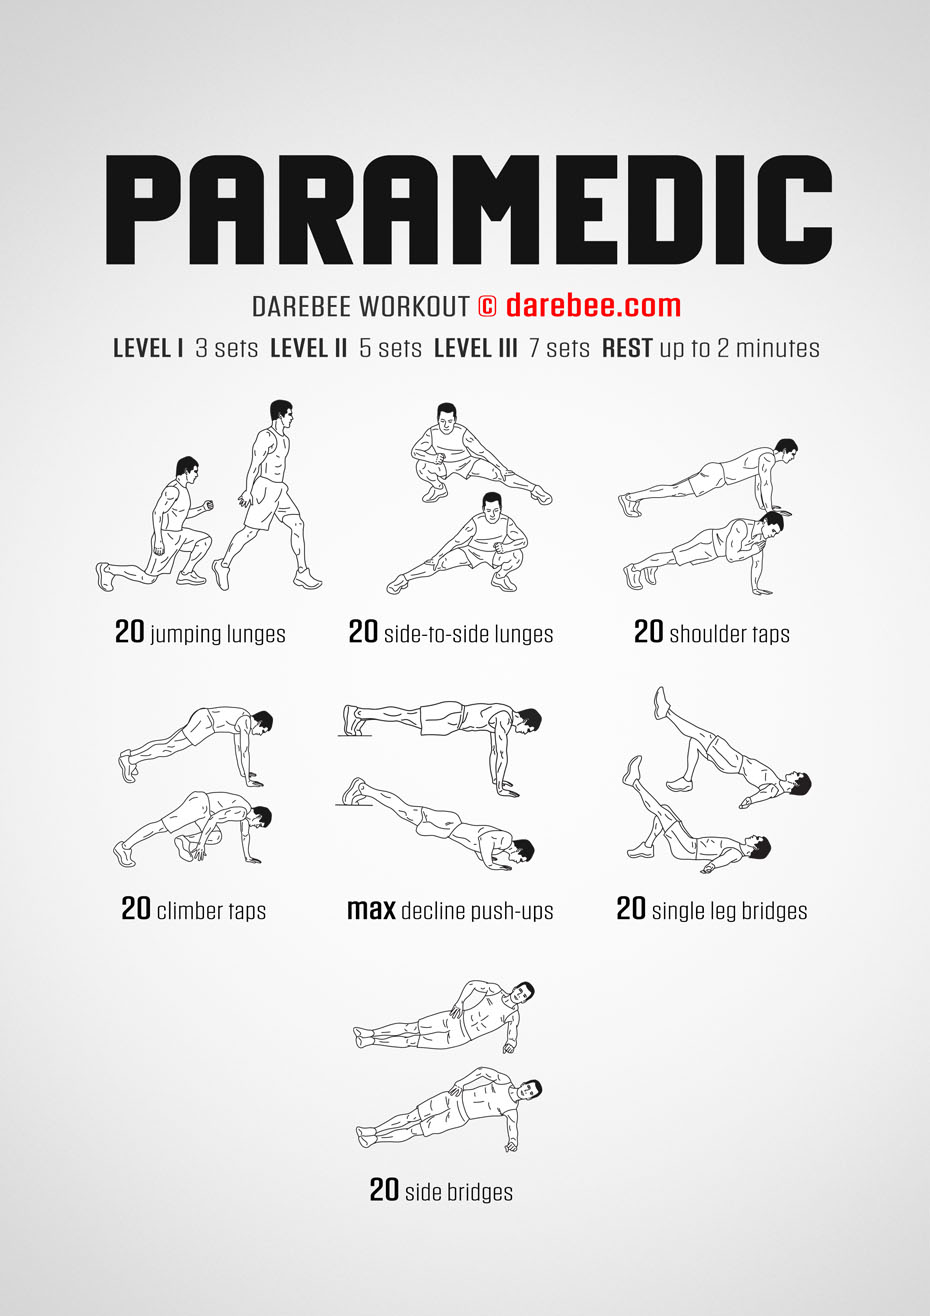 Paramedic is a DAREBEE home fitness no-equipment strength workout that will test your brain and body.